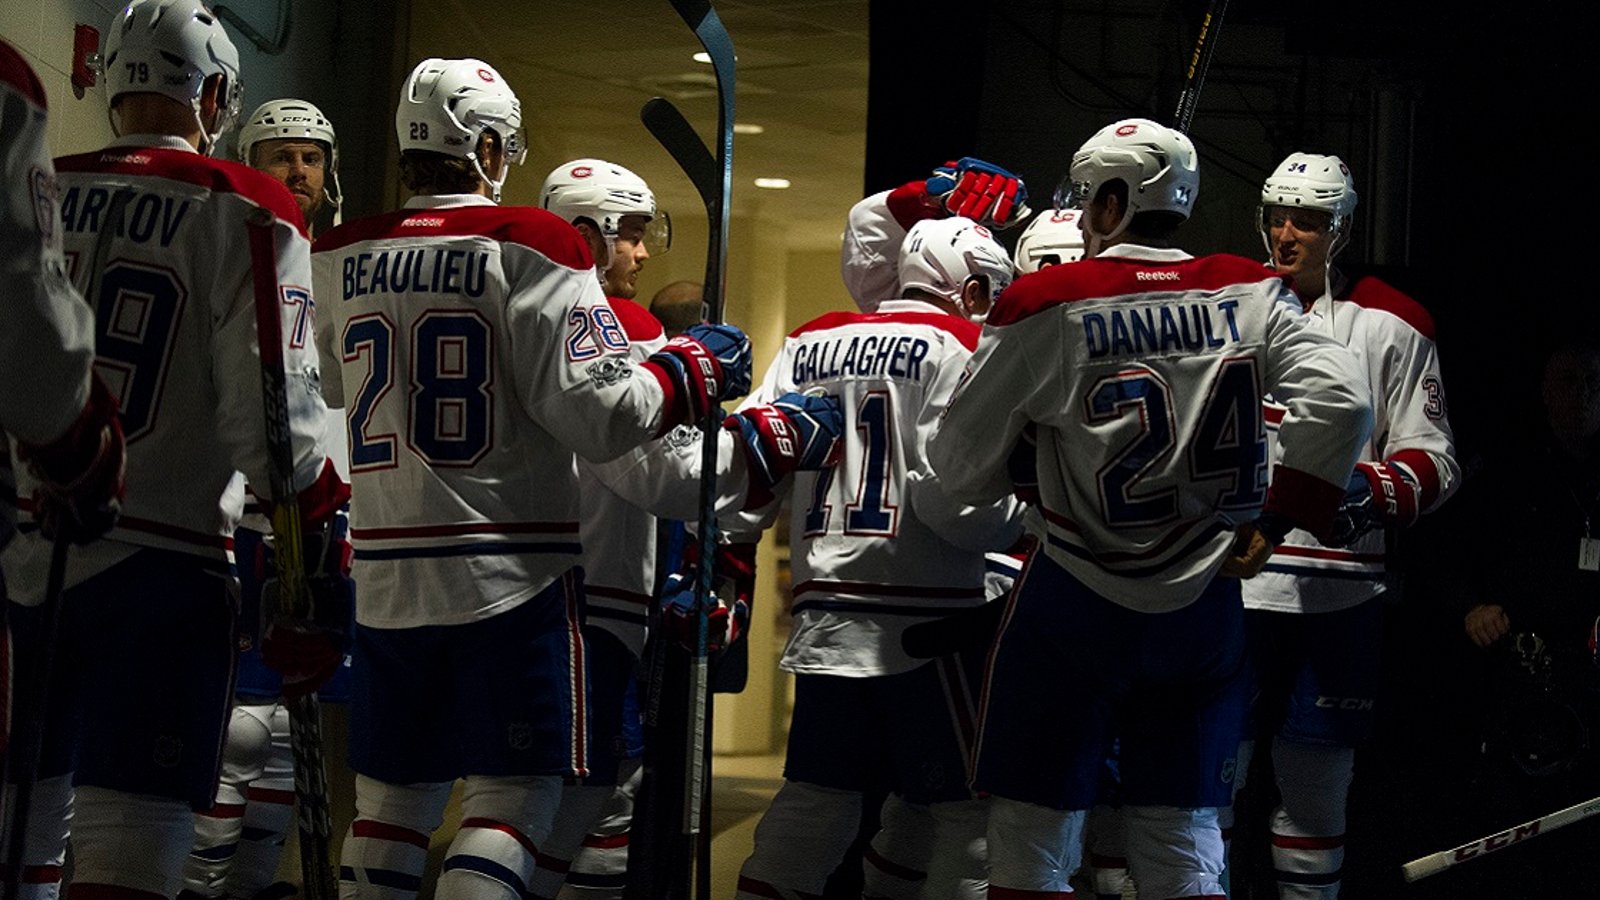 Breaking: Habs make 4 changes to the line up after defenseman is ruled out with injury.